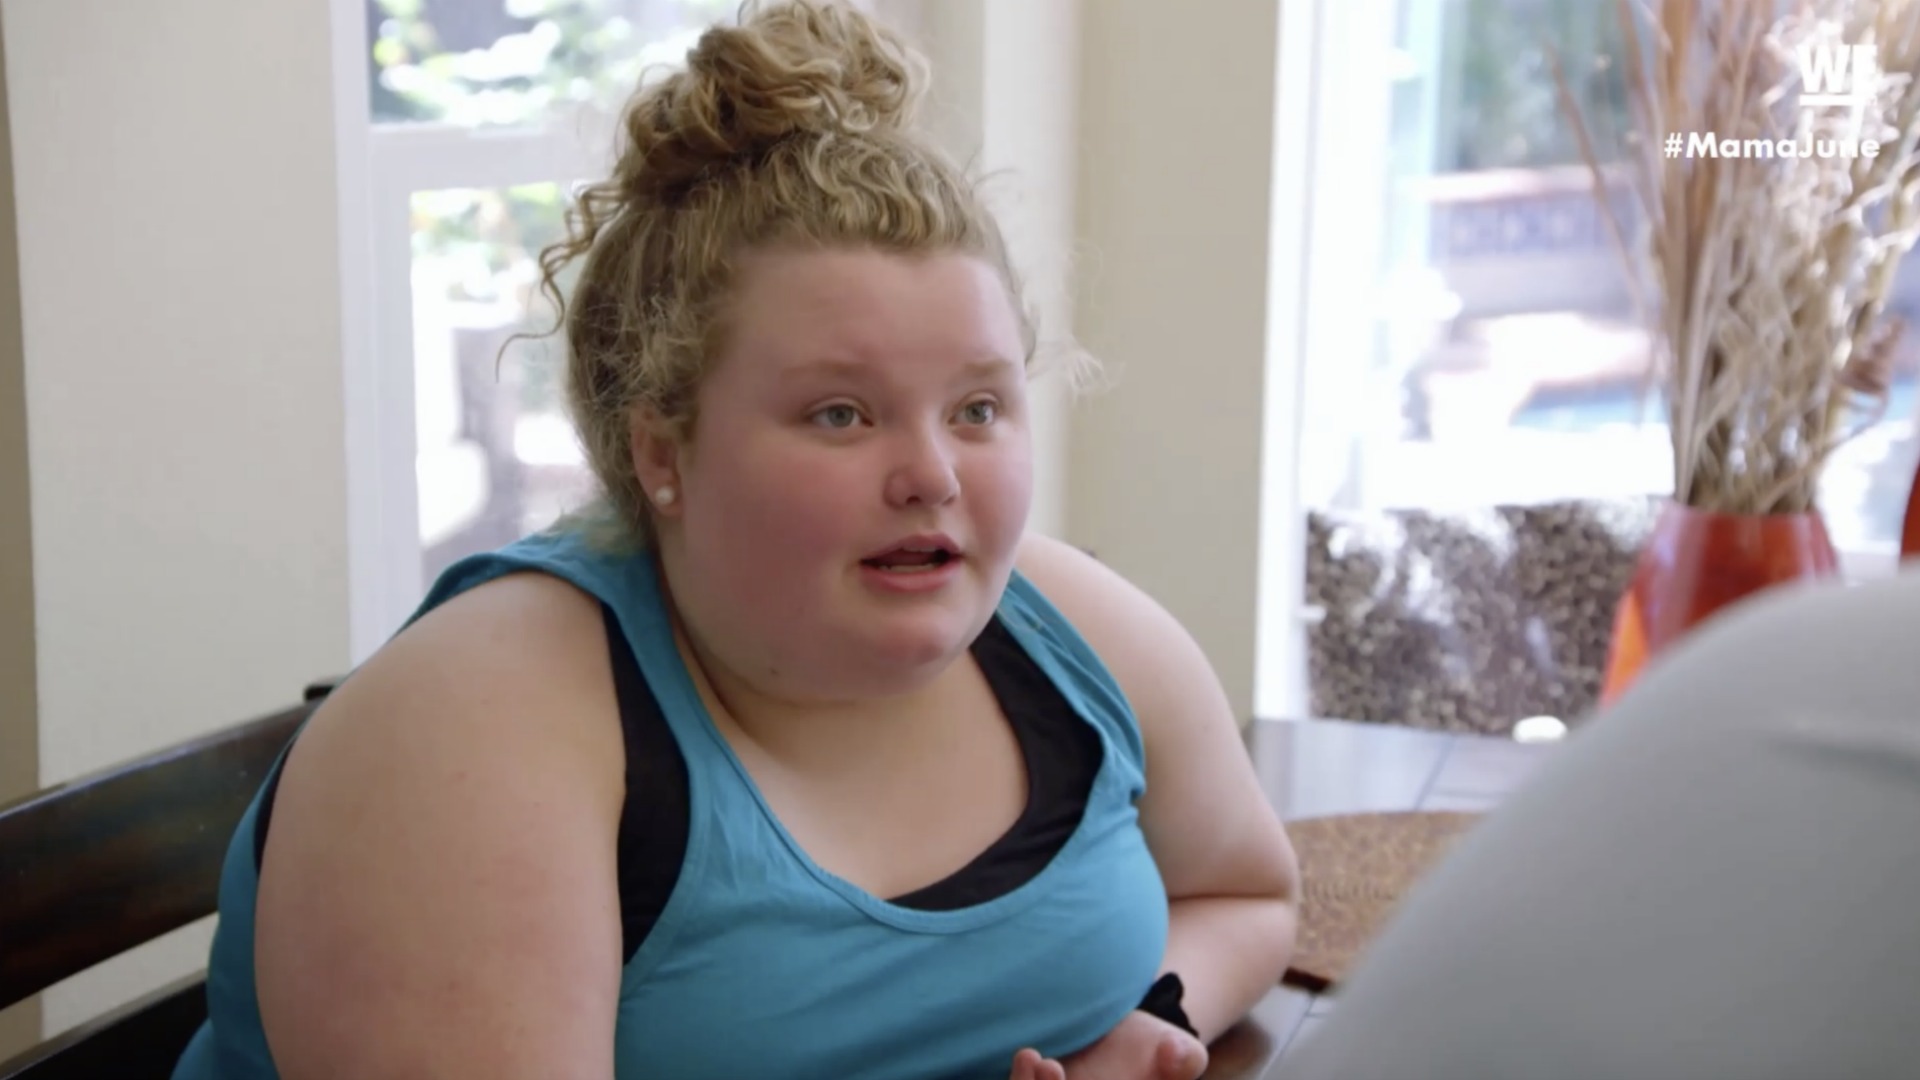 Watch #FamilyHealing Tip No. 76: Set a Routine! | Mama June: From Not to Hot Video Extras